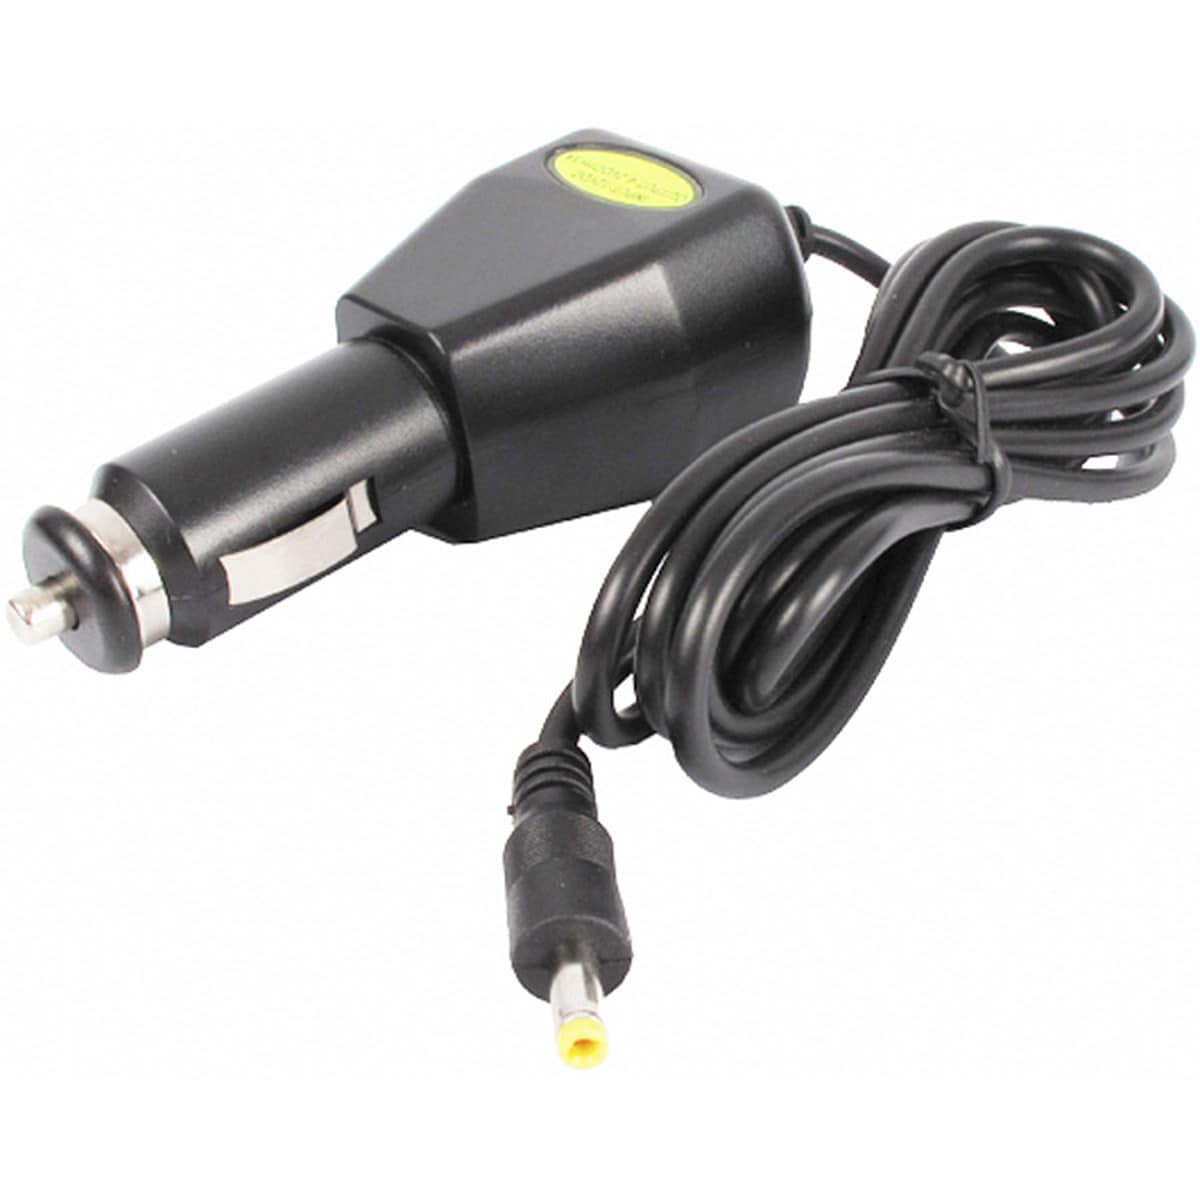 Exposure Car Charger